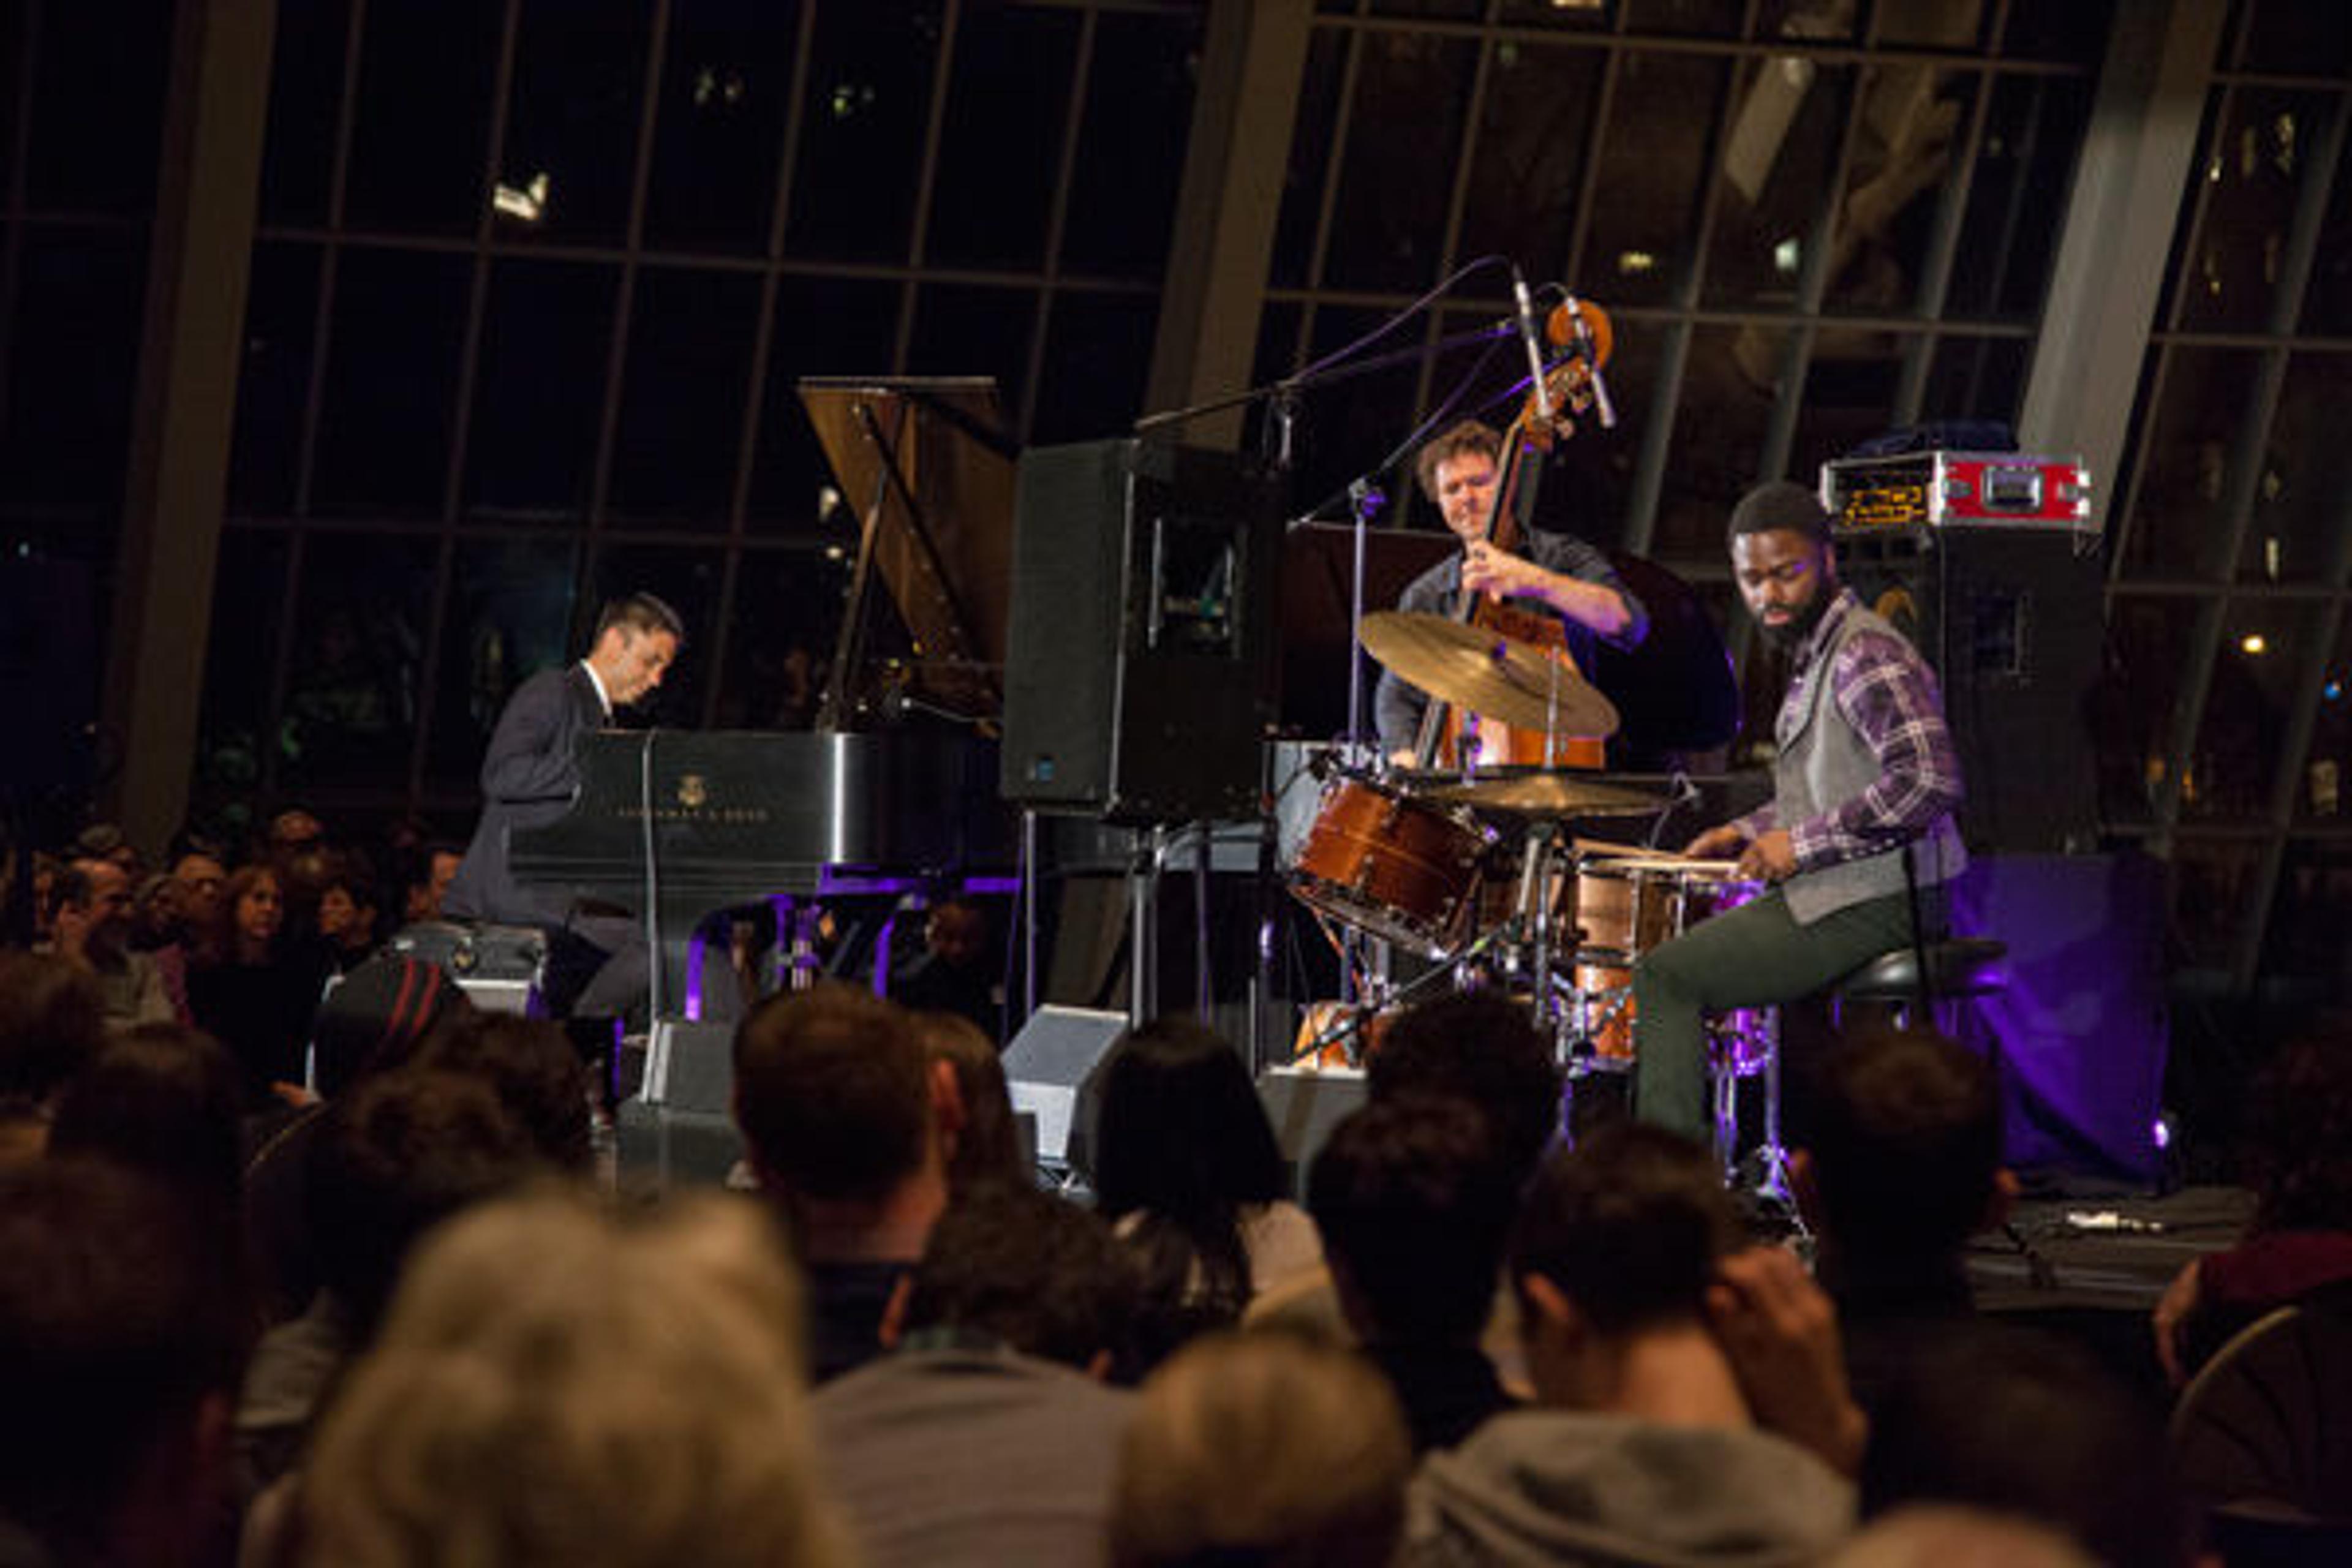 The Vijay Iyer Trio performs in The Temple of Dendur in The Sackler Wing, March 7, 2015. Photo by Anja Hitzenberger